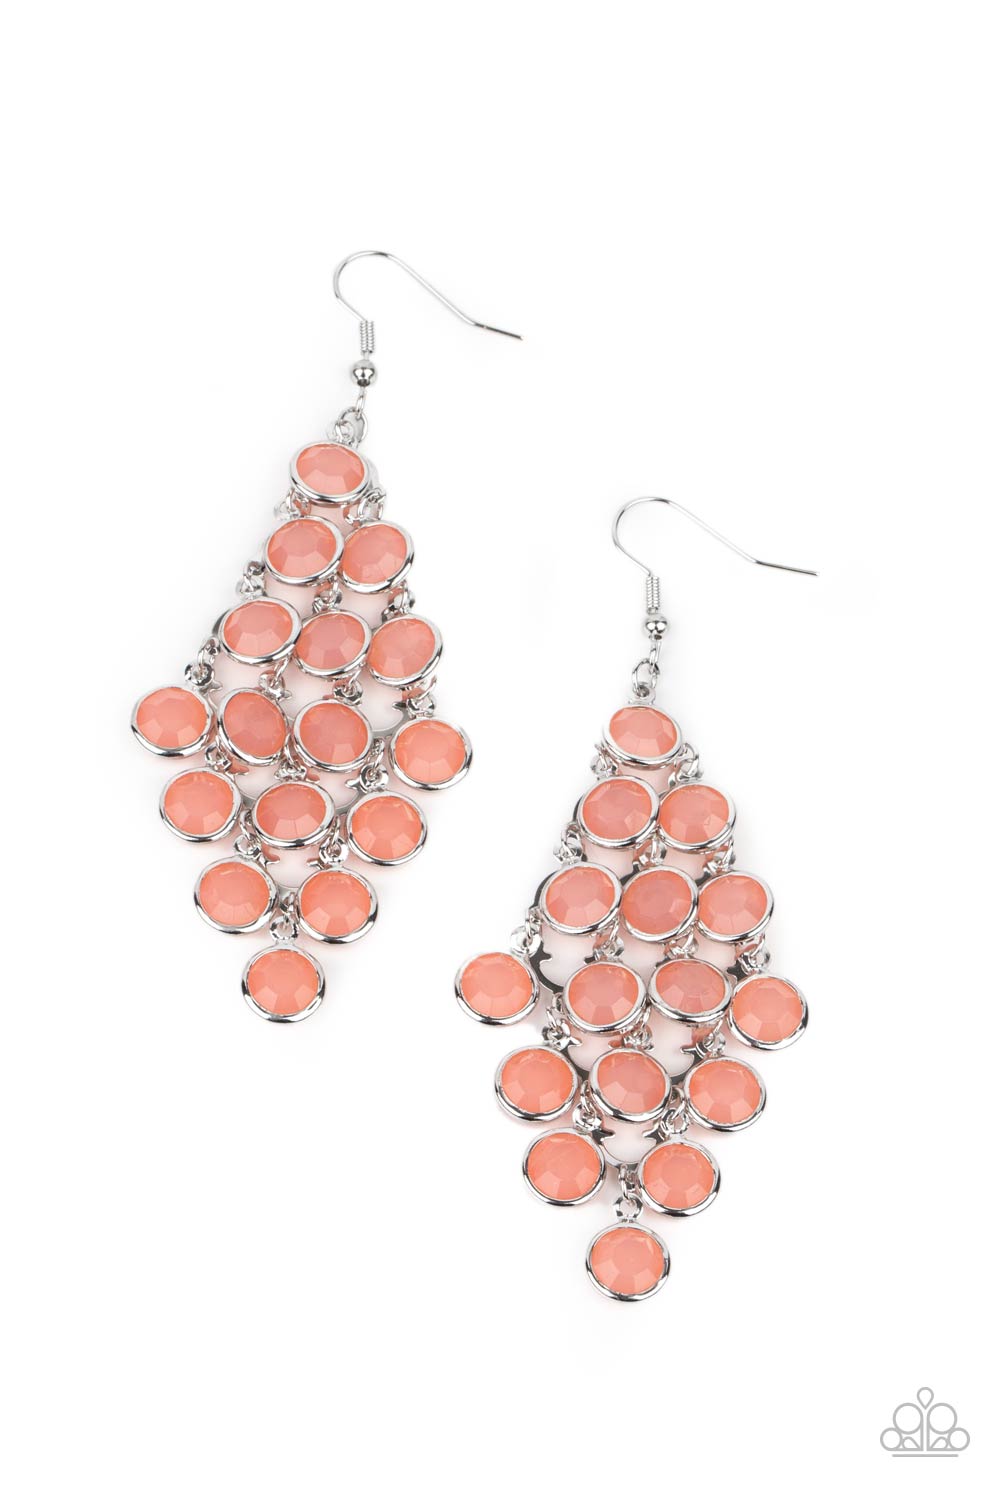 With All DEW Respect Orange Gem Earrings - Paparazzi Accessories- lightbox - CarasShop.com - $5 Jewelry by Cara Jewels